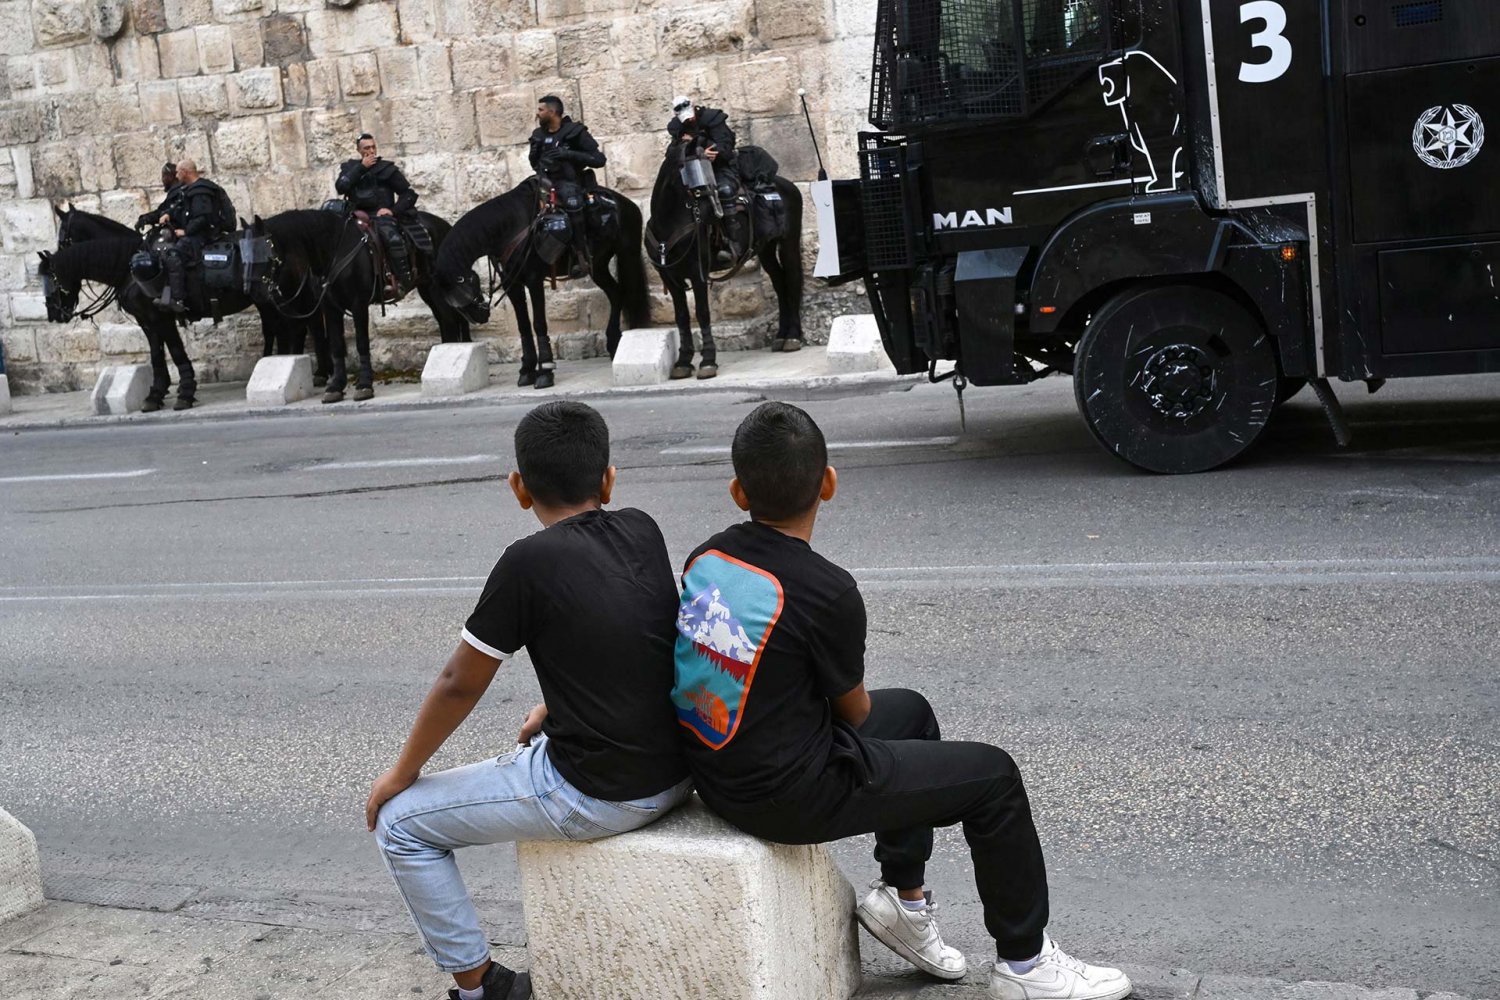 Two Palestinian children looking at Israeli soldiers on horses 